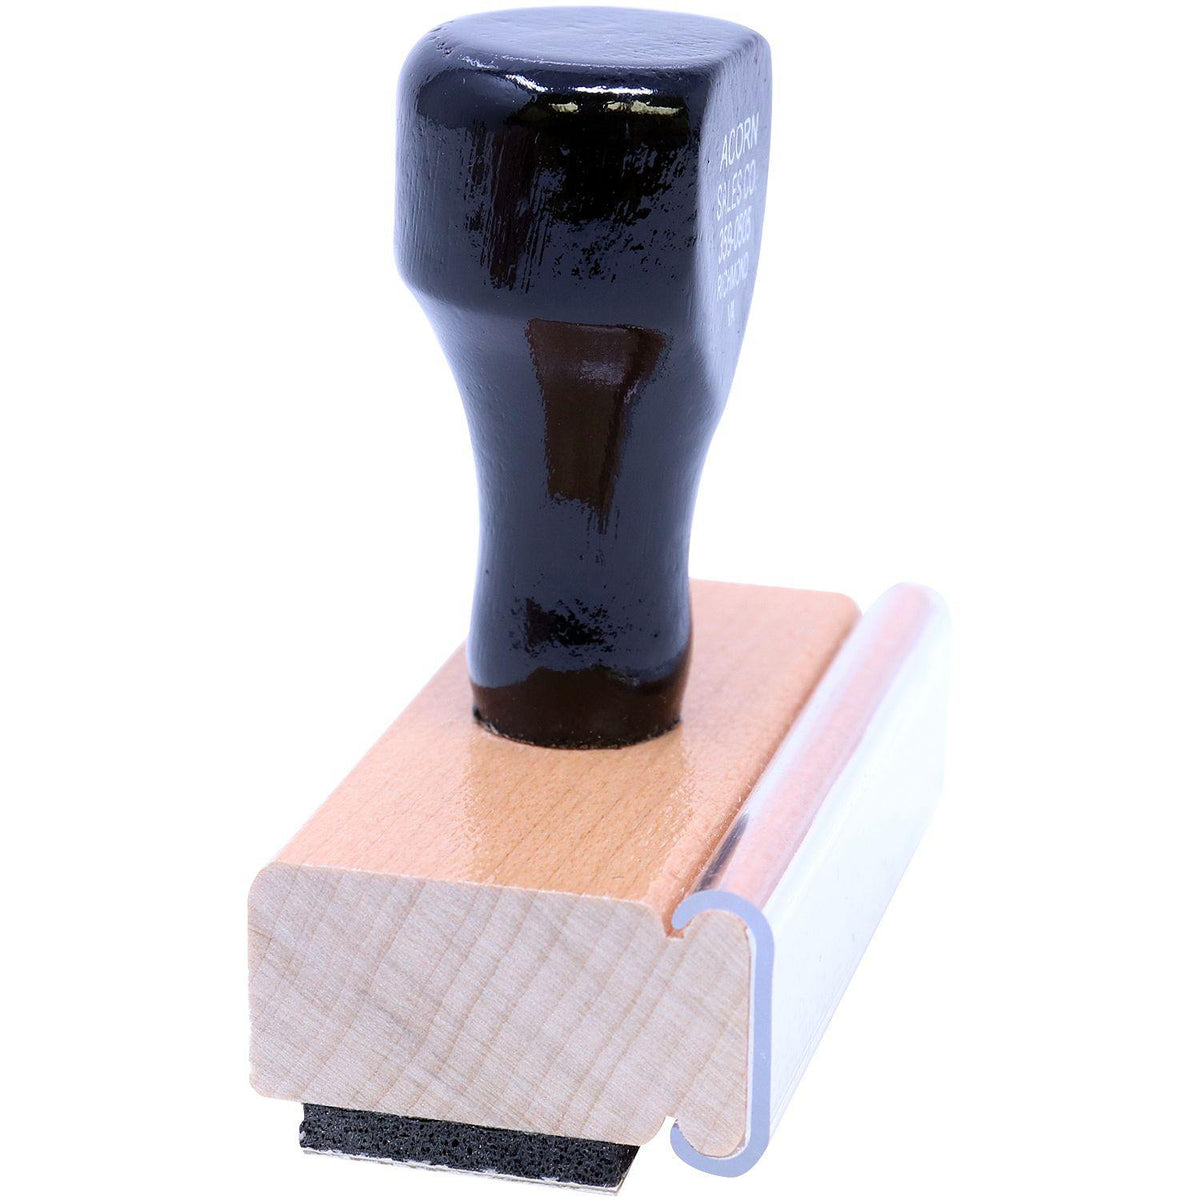 Side View of Large Received in Damaged Condition Rubber Stamp at an Angle